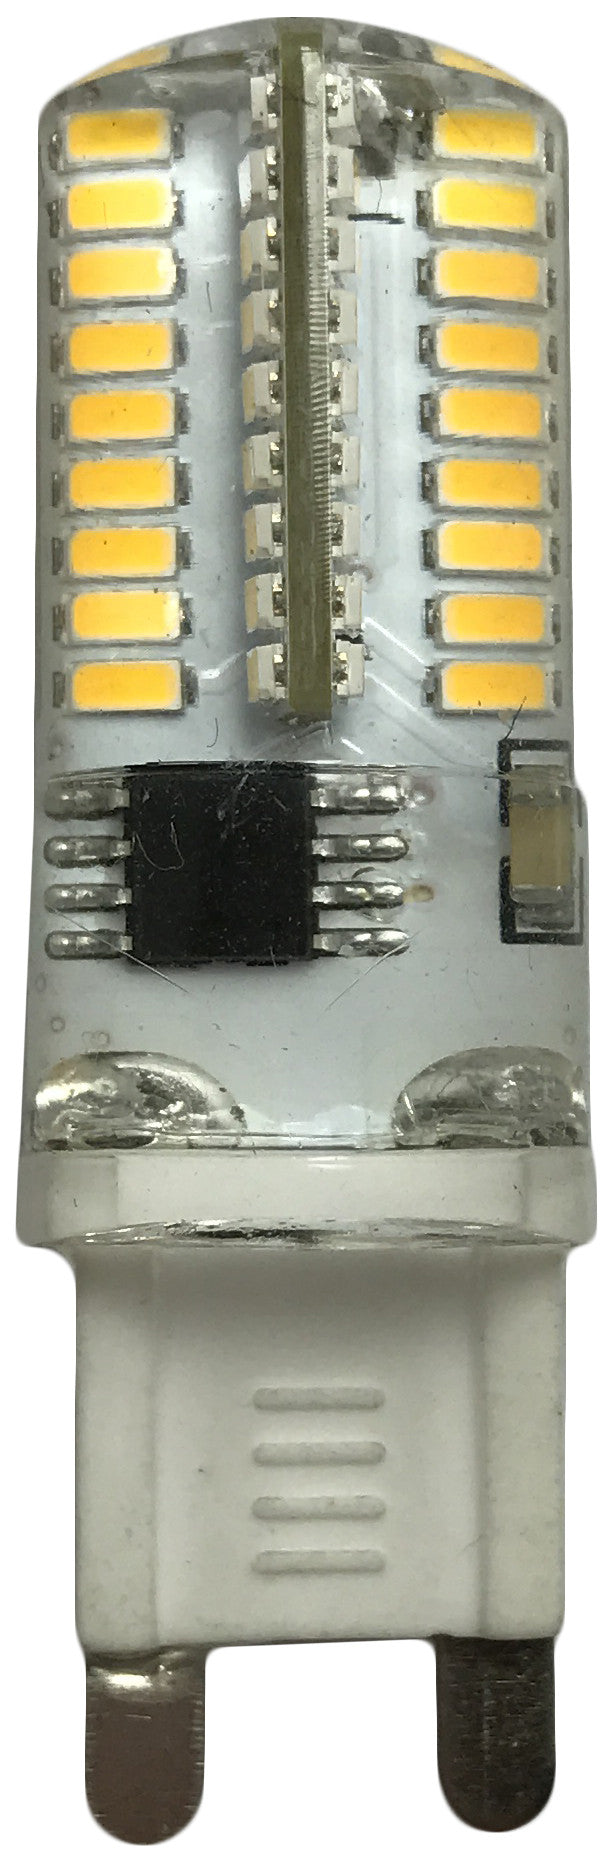 161155 - Specific LED G9 3W 3000K 220Lm